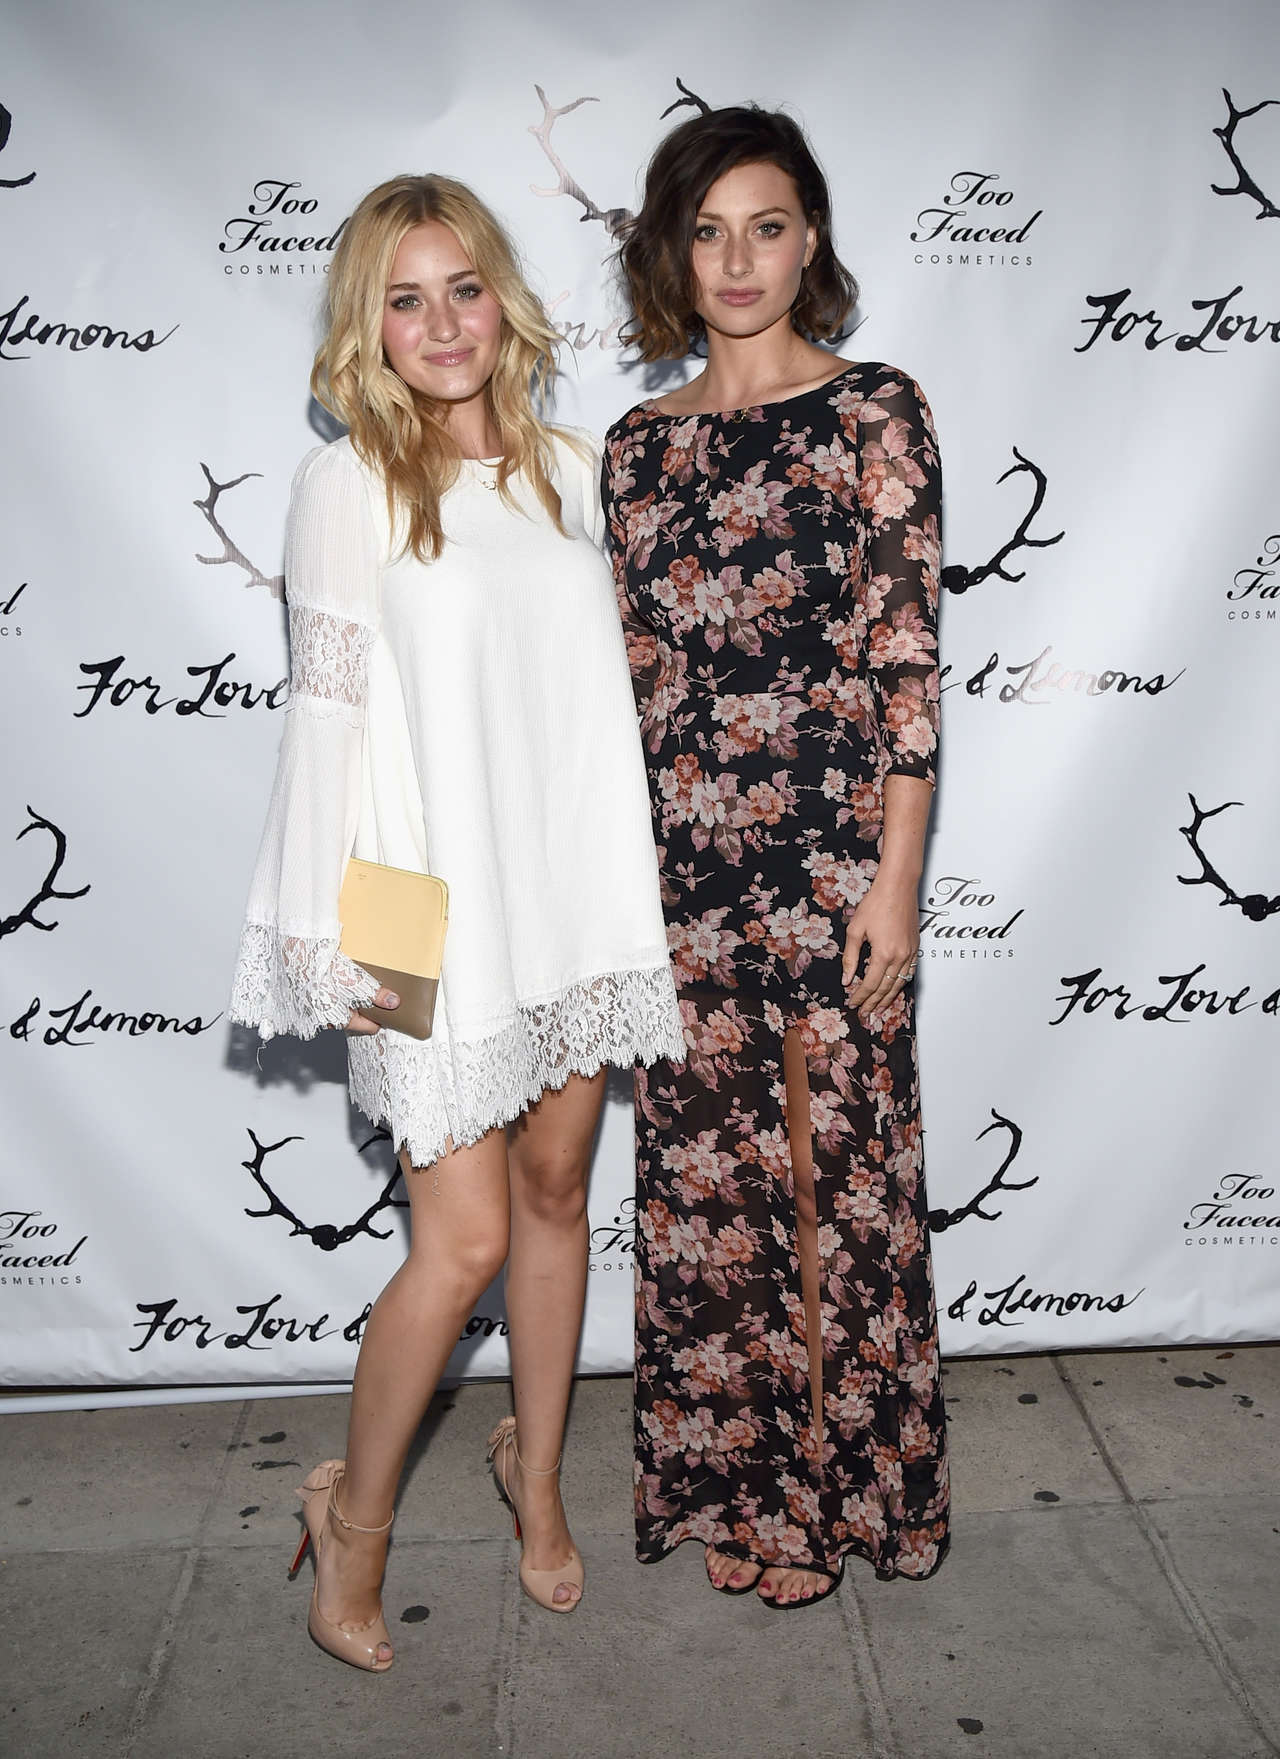 Amanda and Alyson Aly Michalka For Love and Lemons annual SKIVVIES party